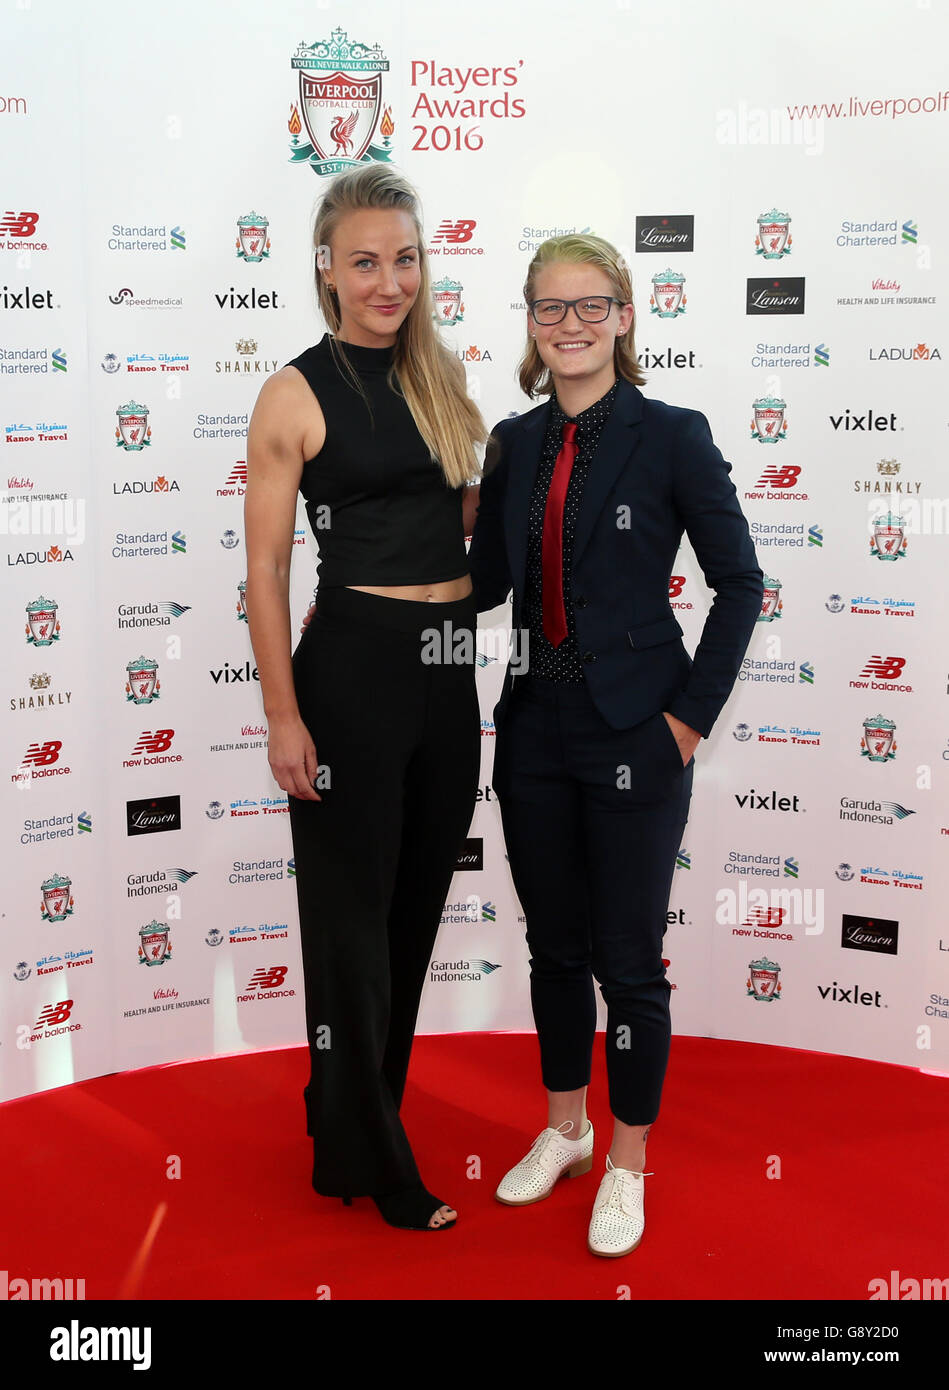 Liverpool's Ladies Emma Lundh (left) and Mandy Van Den Berg arrive for the  Liverpool Players' Awards 2016, at Kings Dock, Liverpool Stock Photo - Alamy